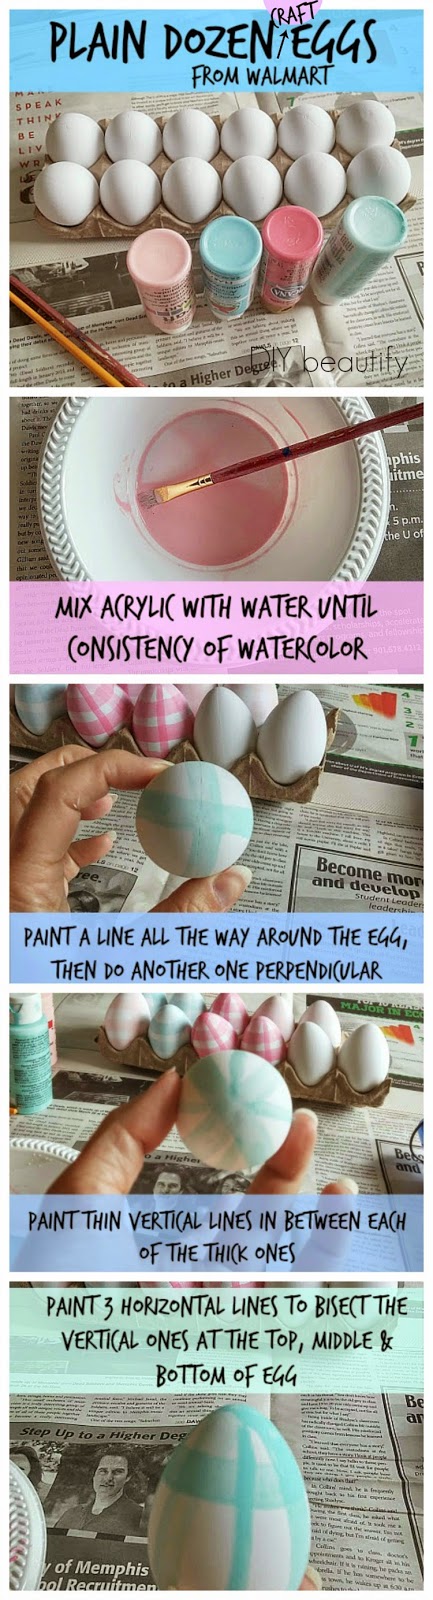 Gingham Painted Eggs How to www.diybeautify.com